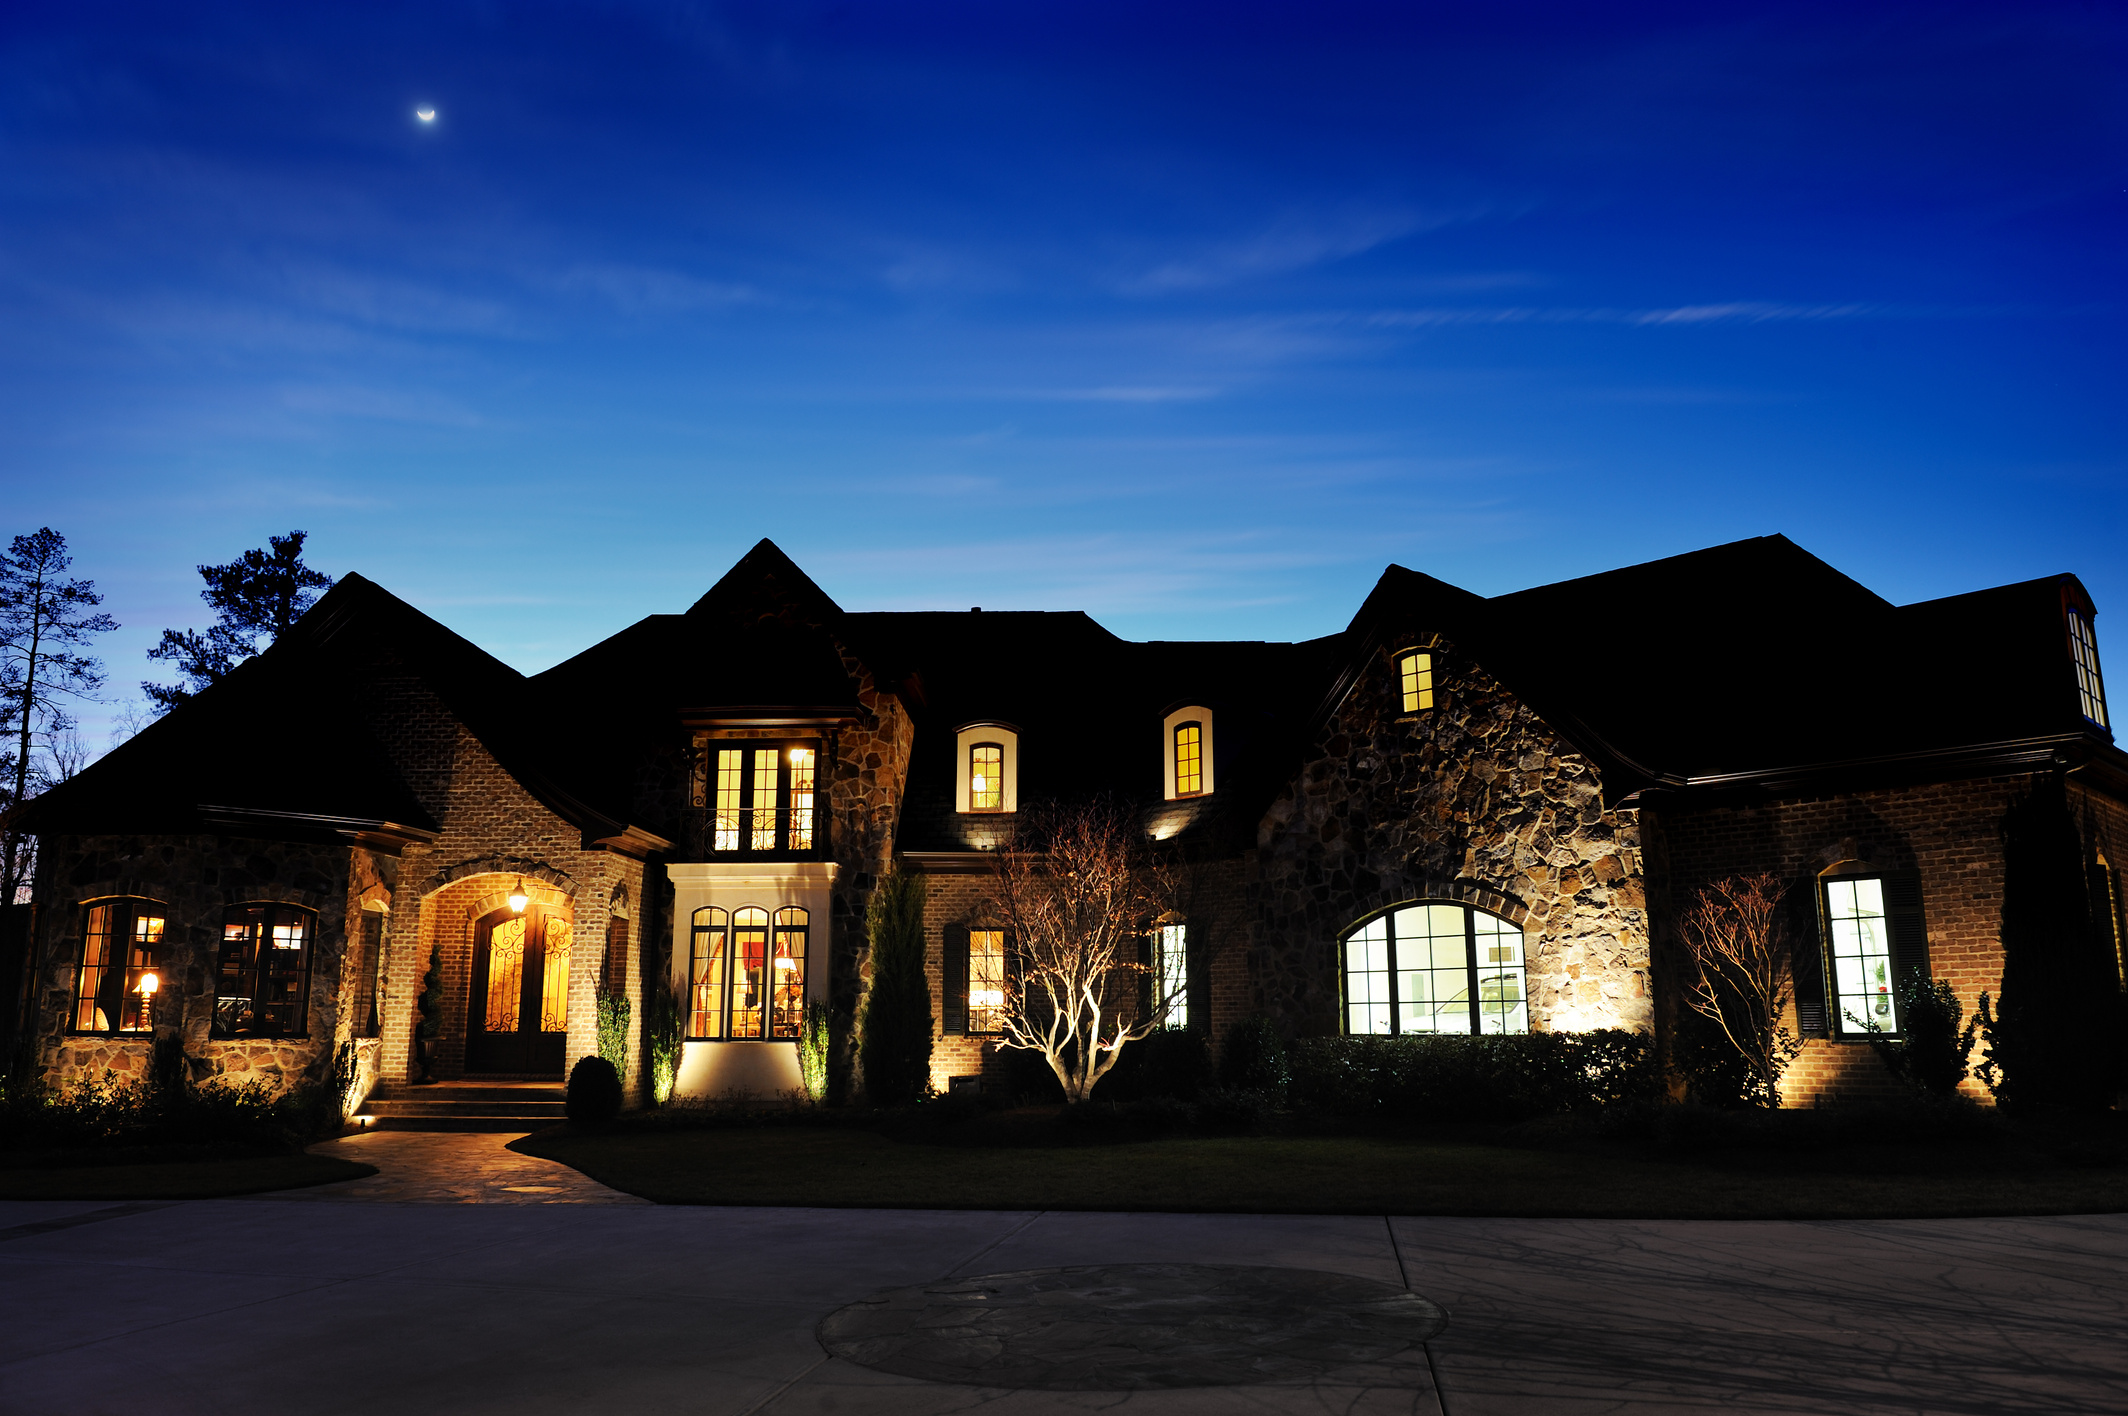 Luxury Home Exterior At Night